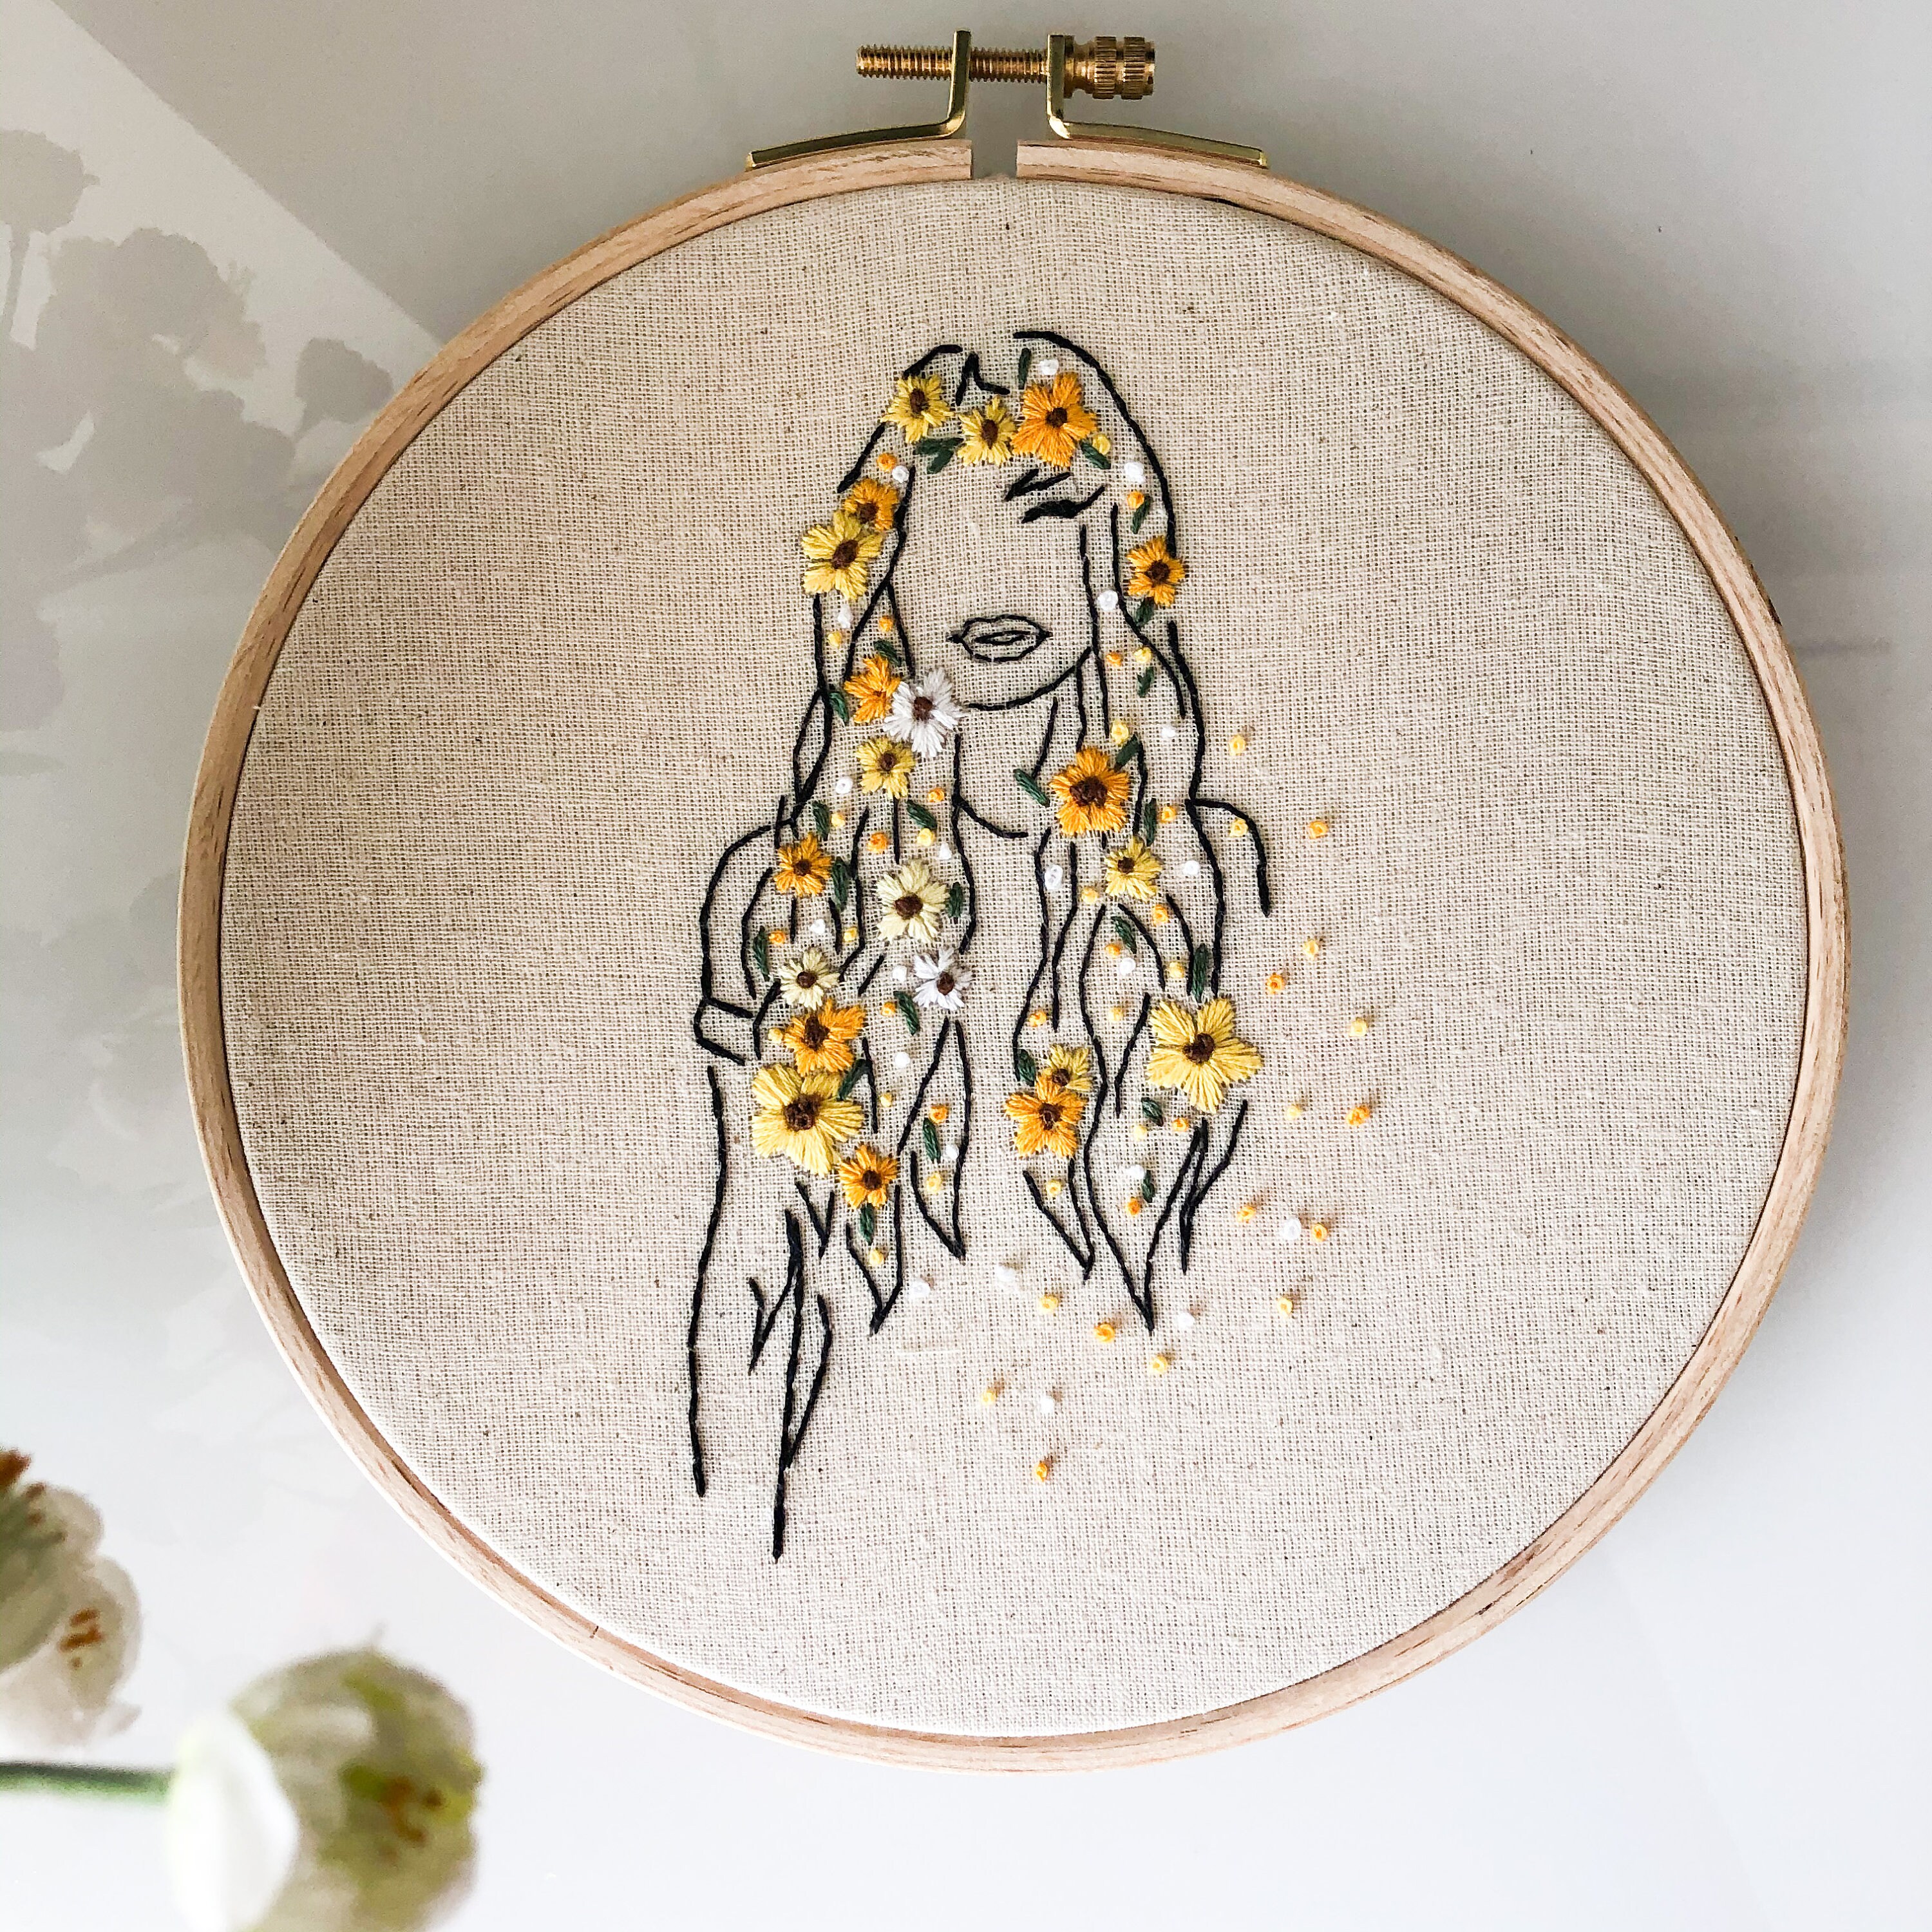 The Complete Beginner's Guide to Embroidery – Girl Got Thread